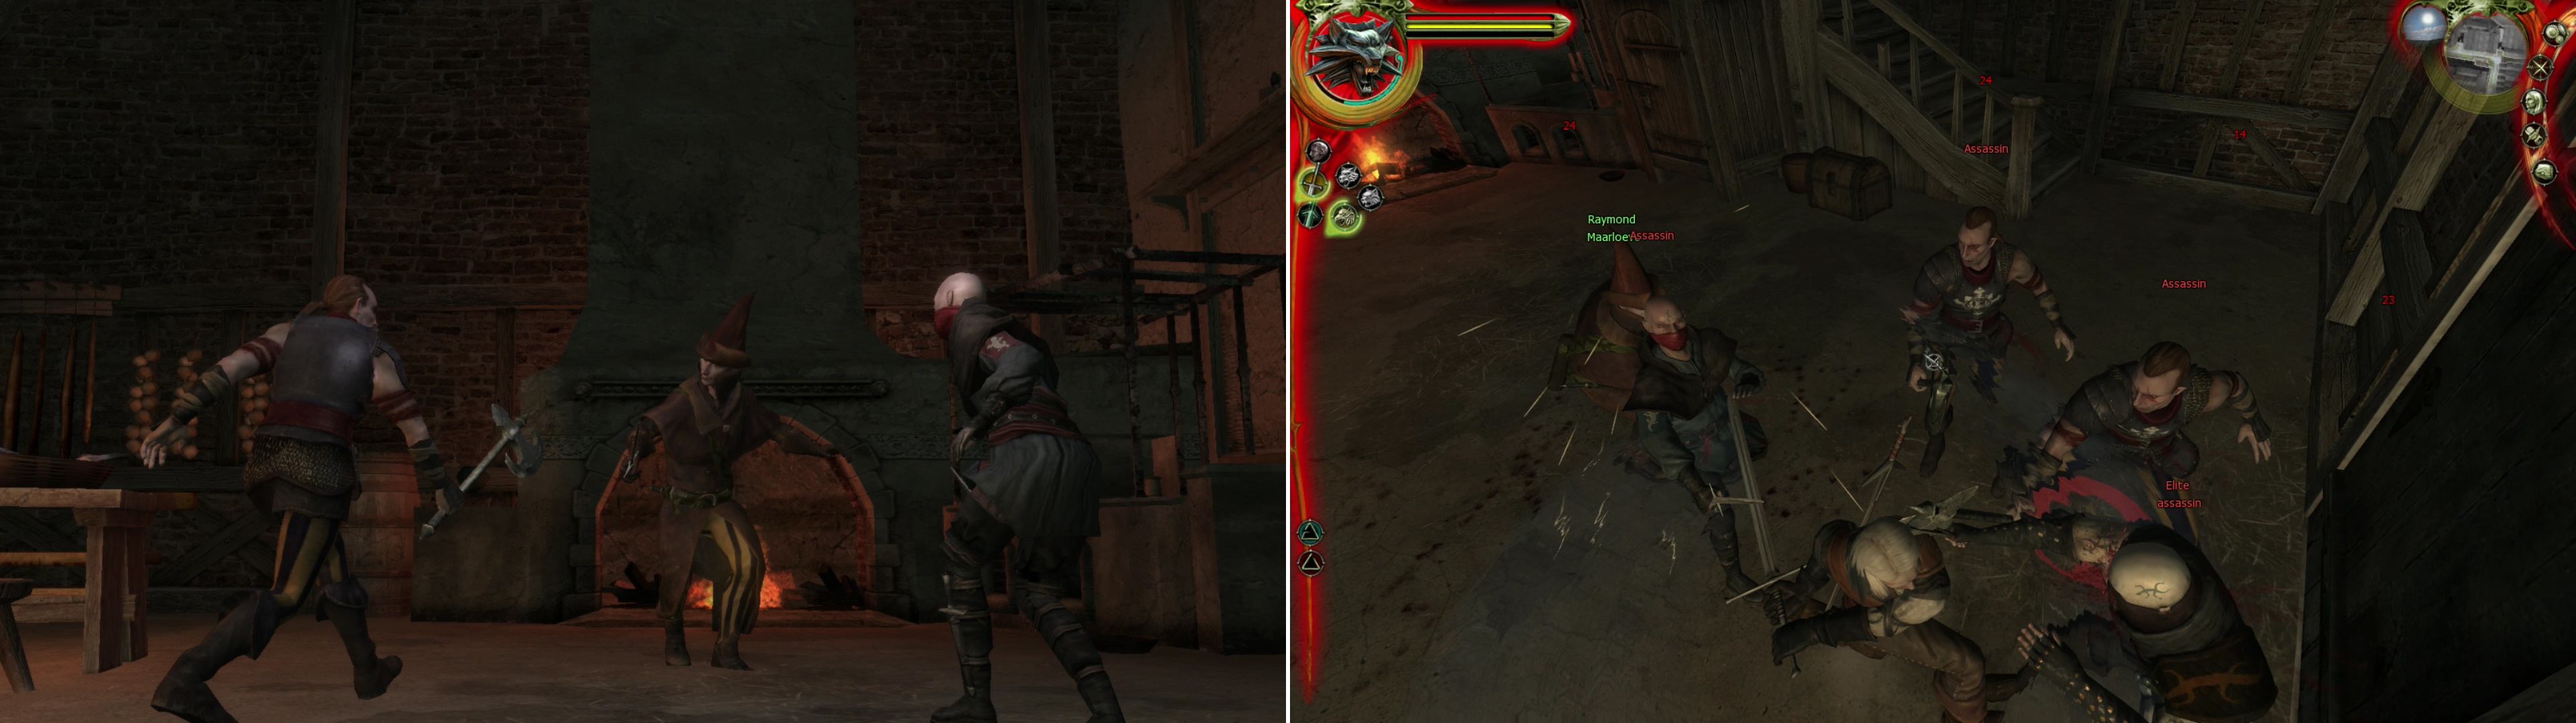 Visit Raymond to find him beset by Salamandra assassins (left). Fortunately hes got a Witcher ally with a good sense of timing on his side (right).